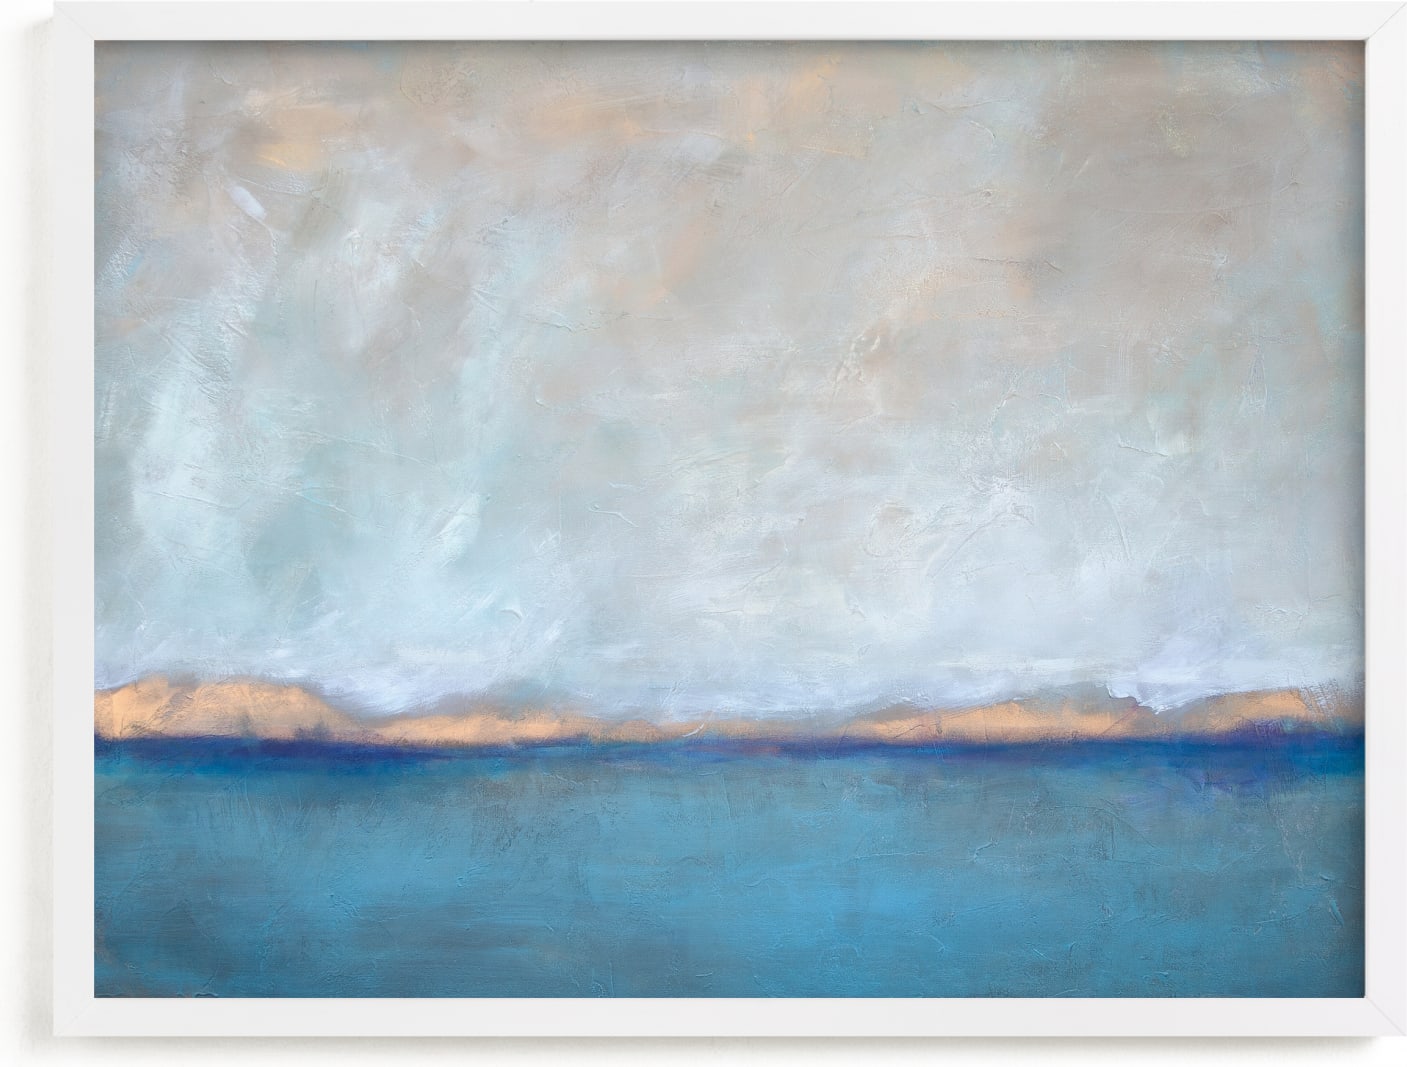 This is a blue art by Julia Contacessi called Linen Coast.